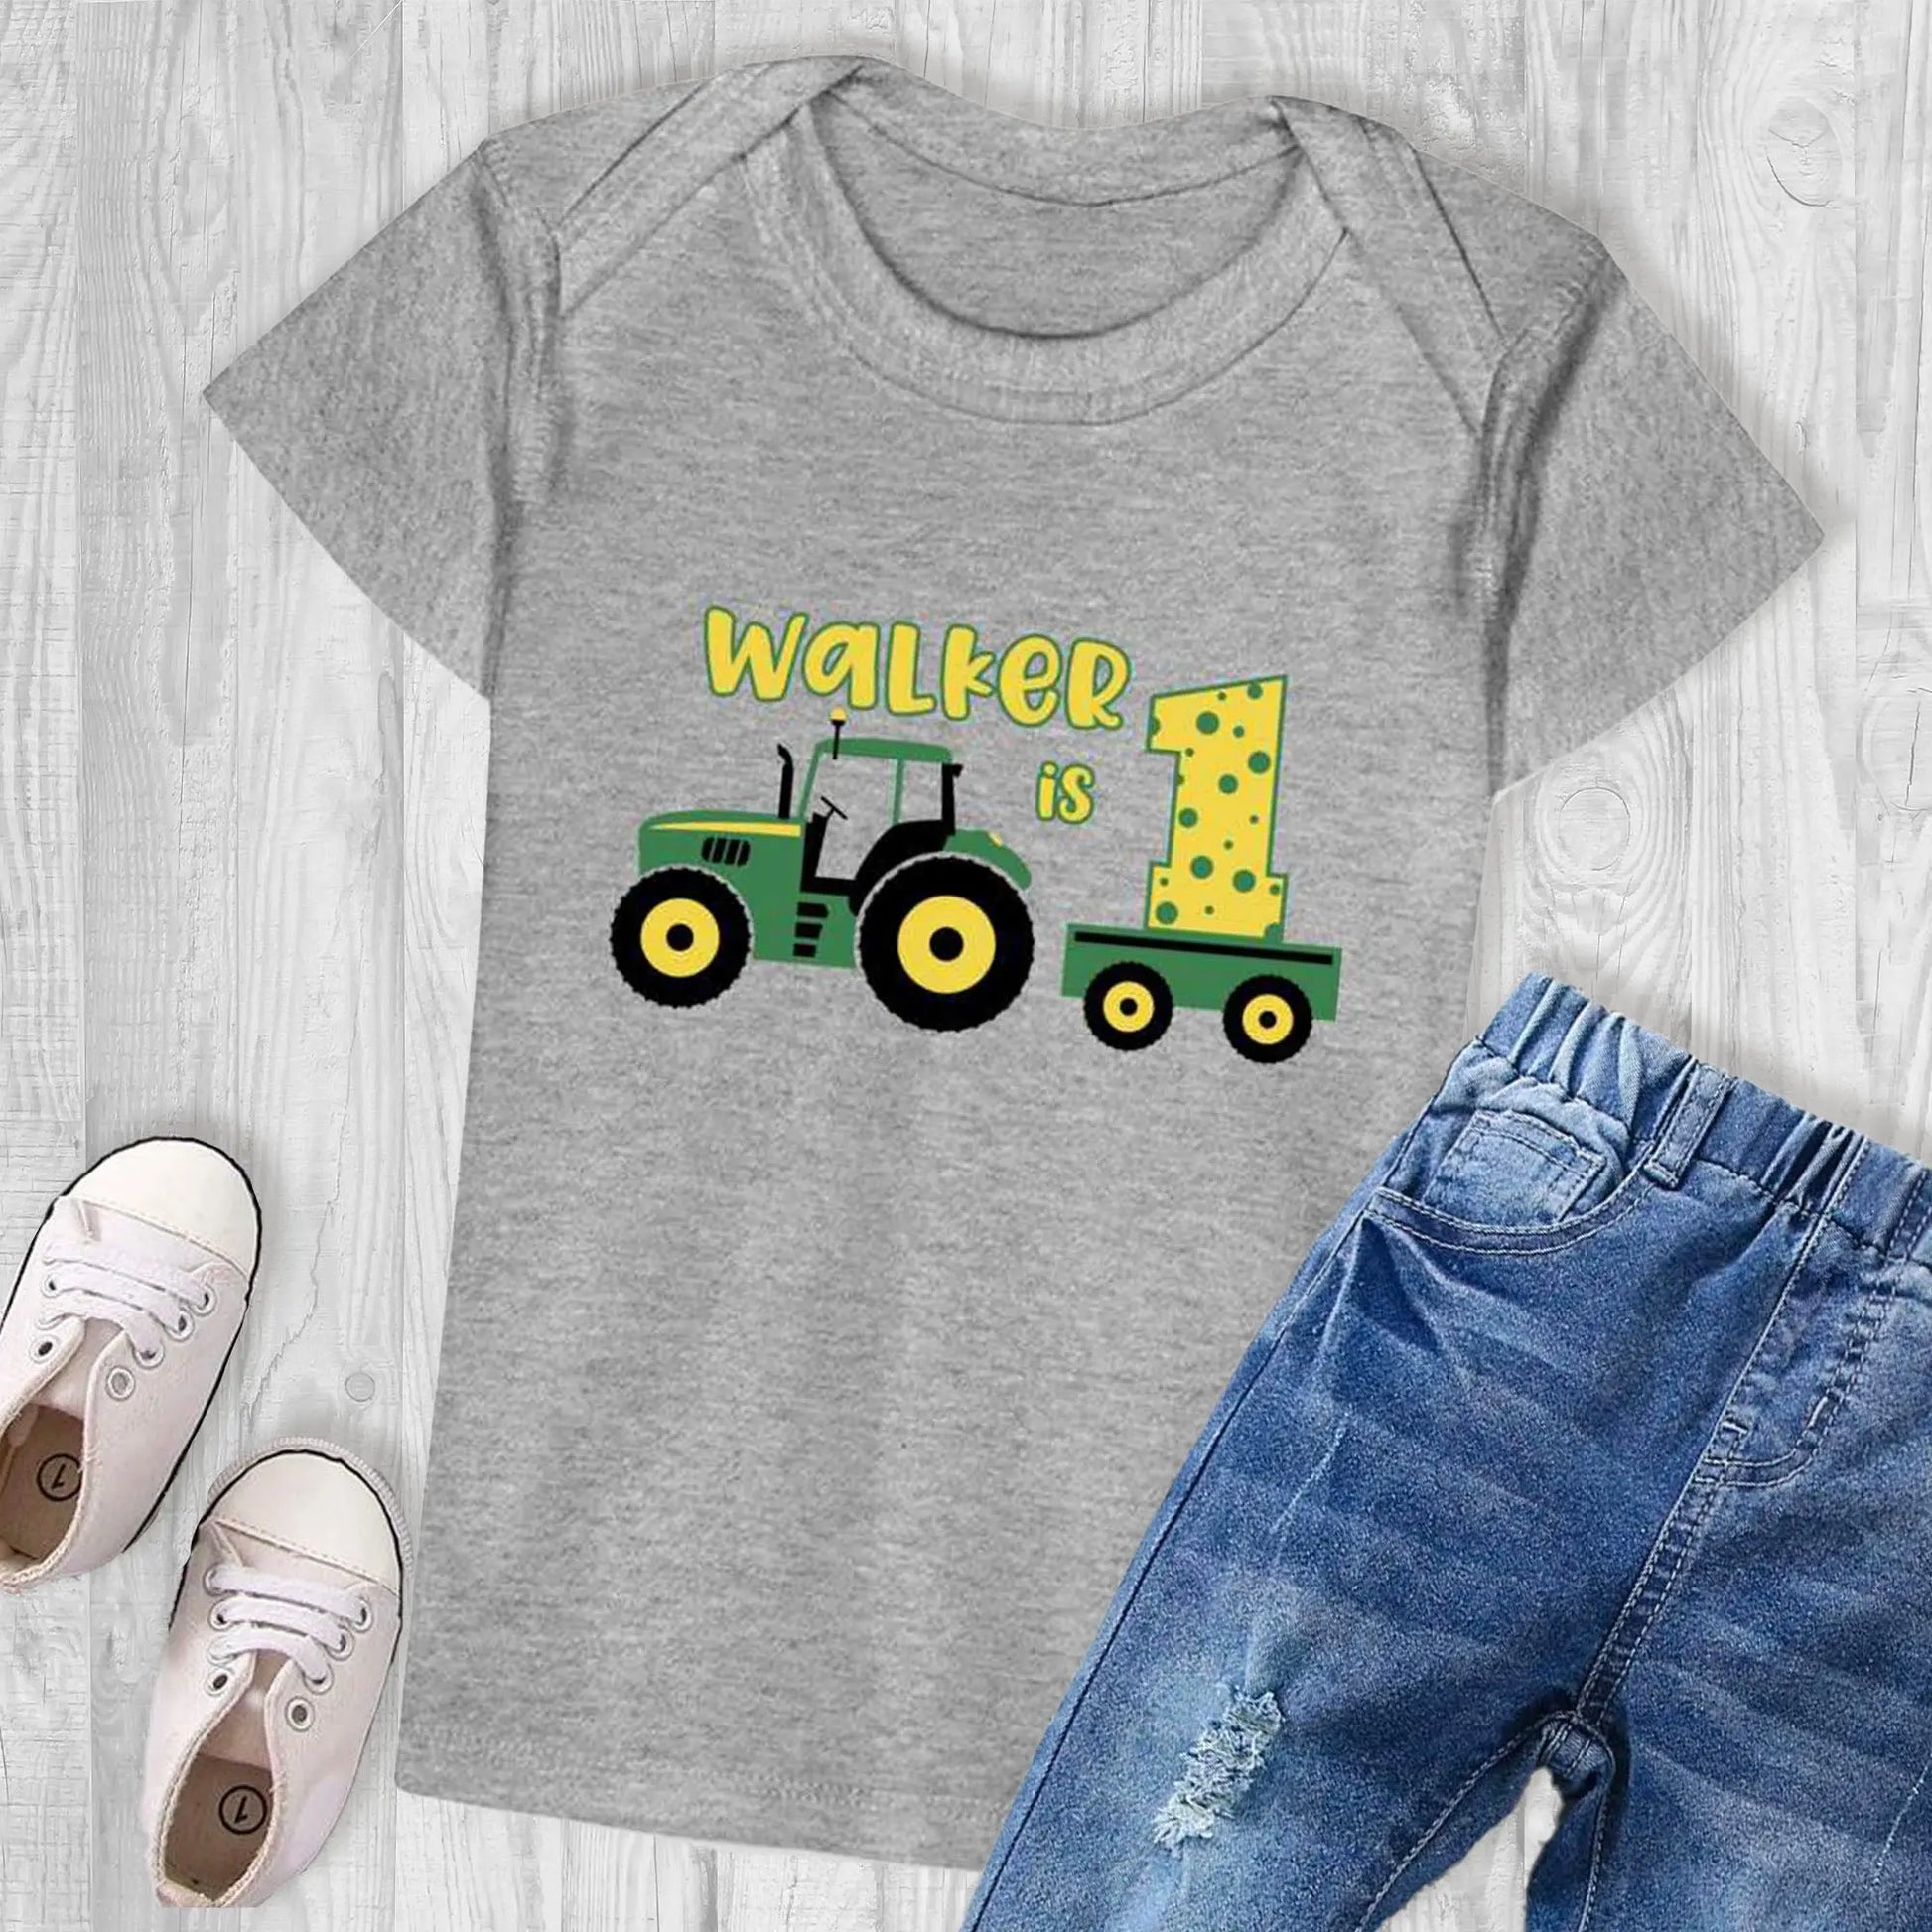 Tractor Personalized Organic Baby T-Shirt SPOD